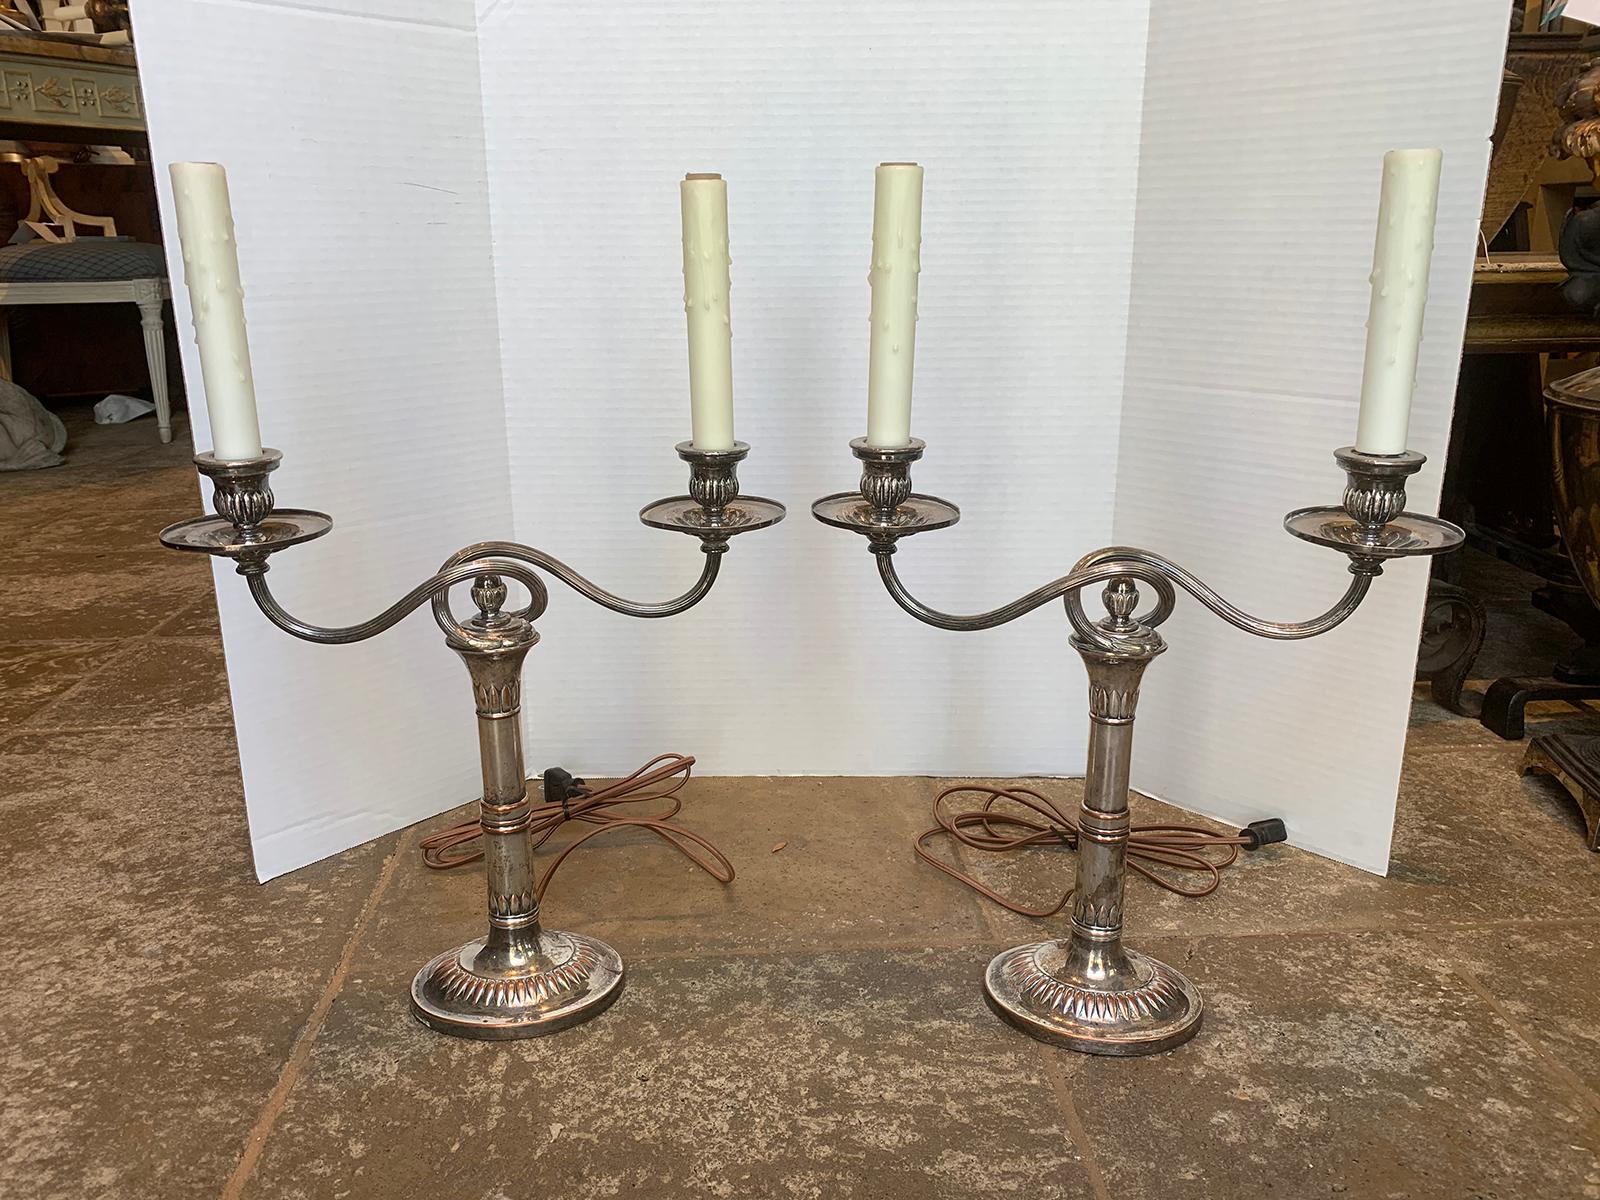 Pair of 19th-20th century sheffield silver two-arm candelabra lamps
New wiring.